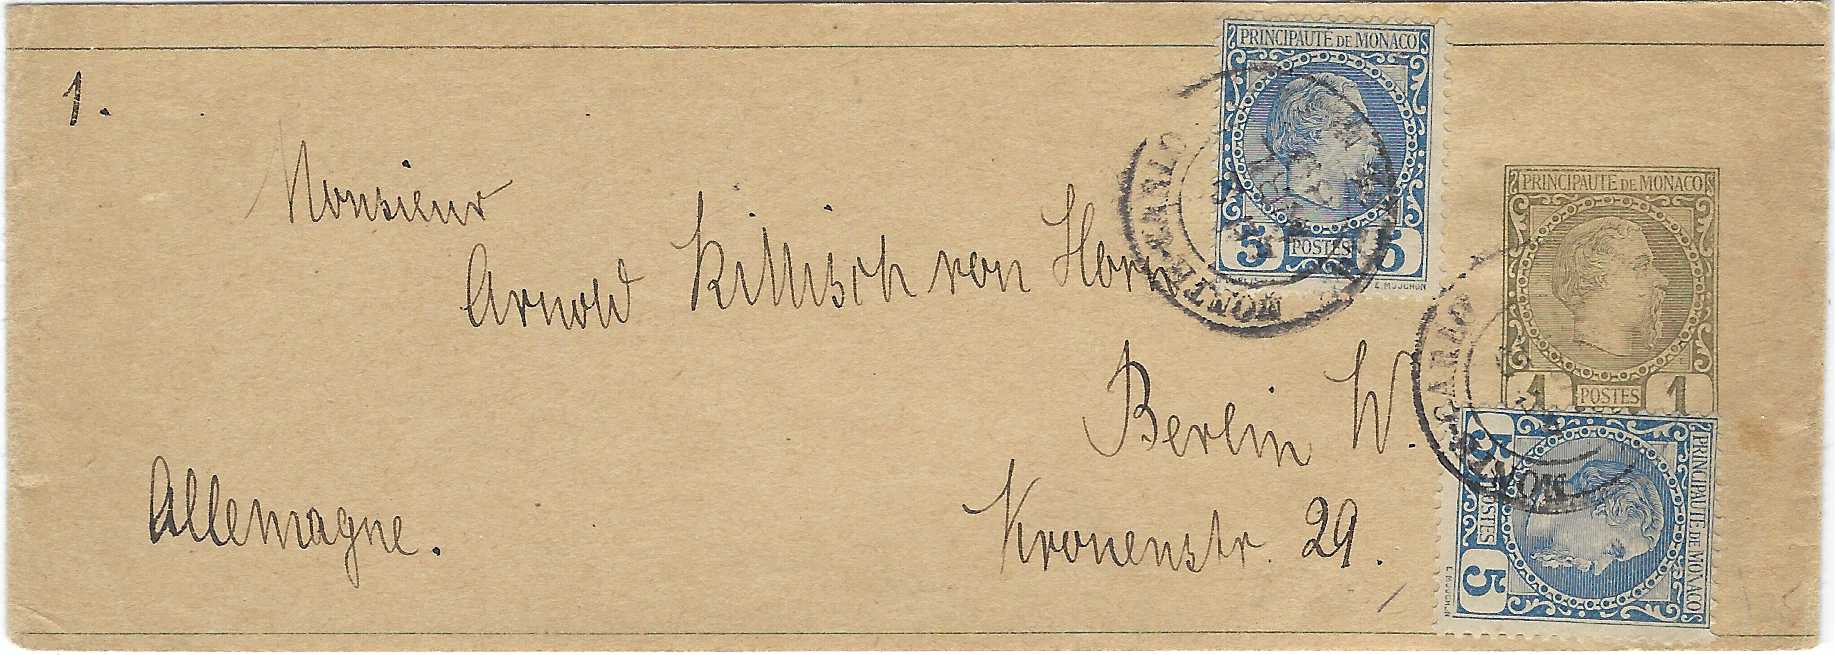 Monaco 1889 (9 Avril) 1c. postal stationery newspaper wrapper, uprated two 1885 5c. to Berlin; fine condition.